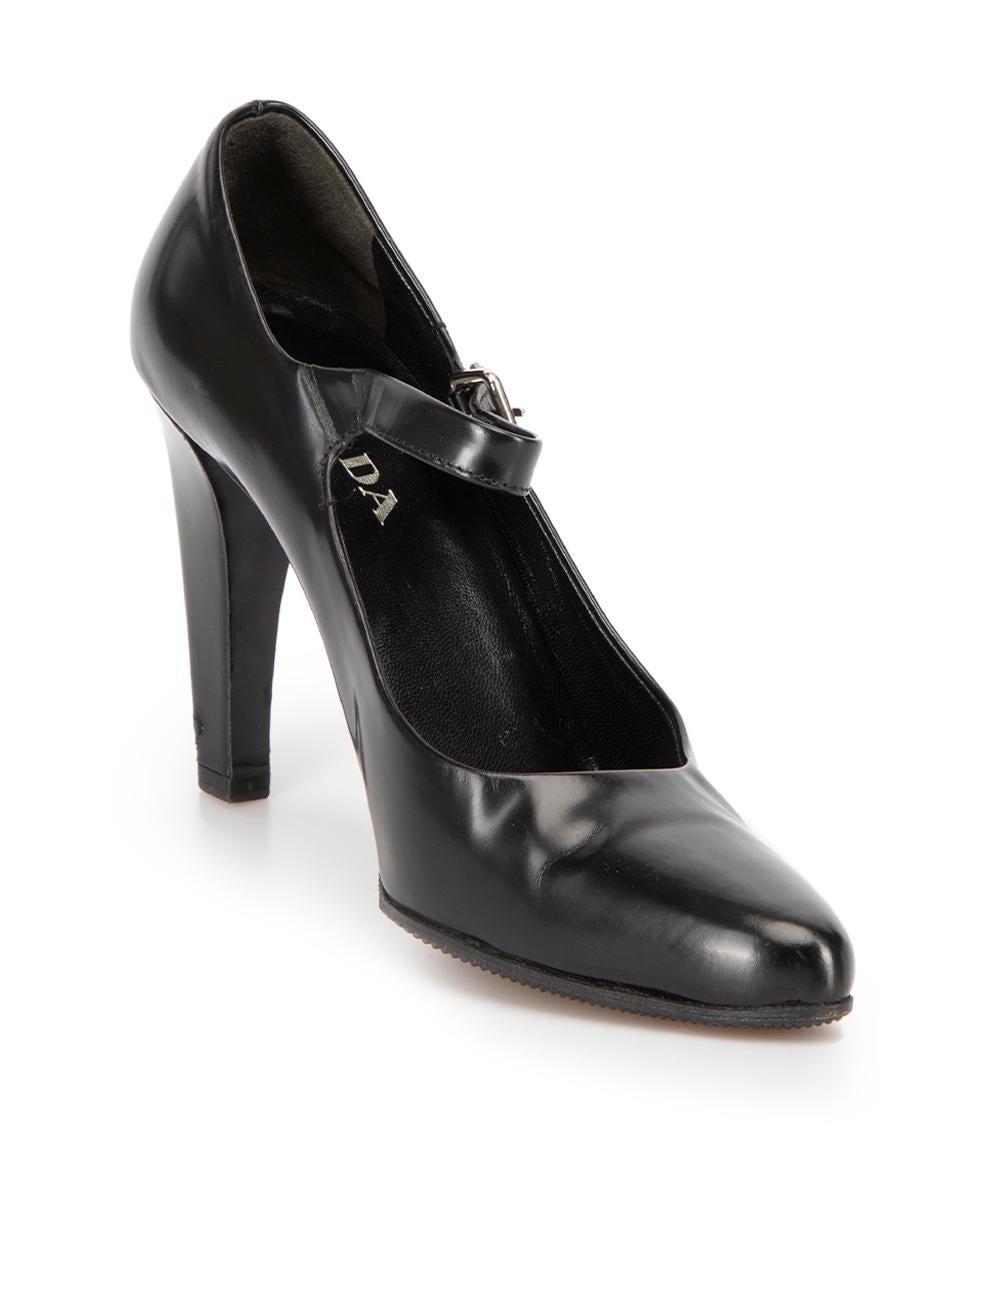 CONDITION is Very good. Minimal wear to shoes is evident. Minimal wear to left shoe heel-stem and the side of the right shoe with dents to the leather on this used Prada designer resale item. 
 
 Details
  Black
 Leather
 Mary Jane heels
 Pointed